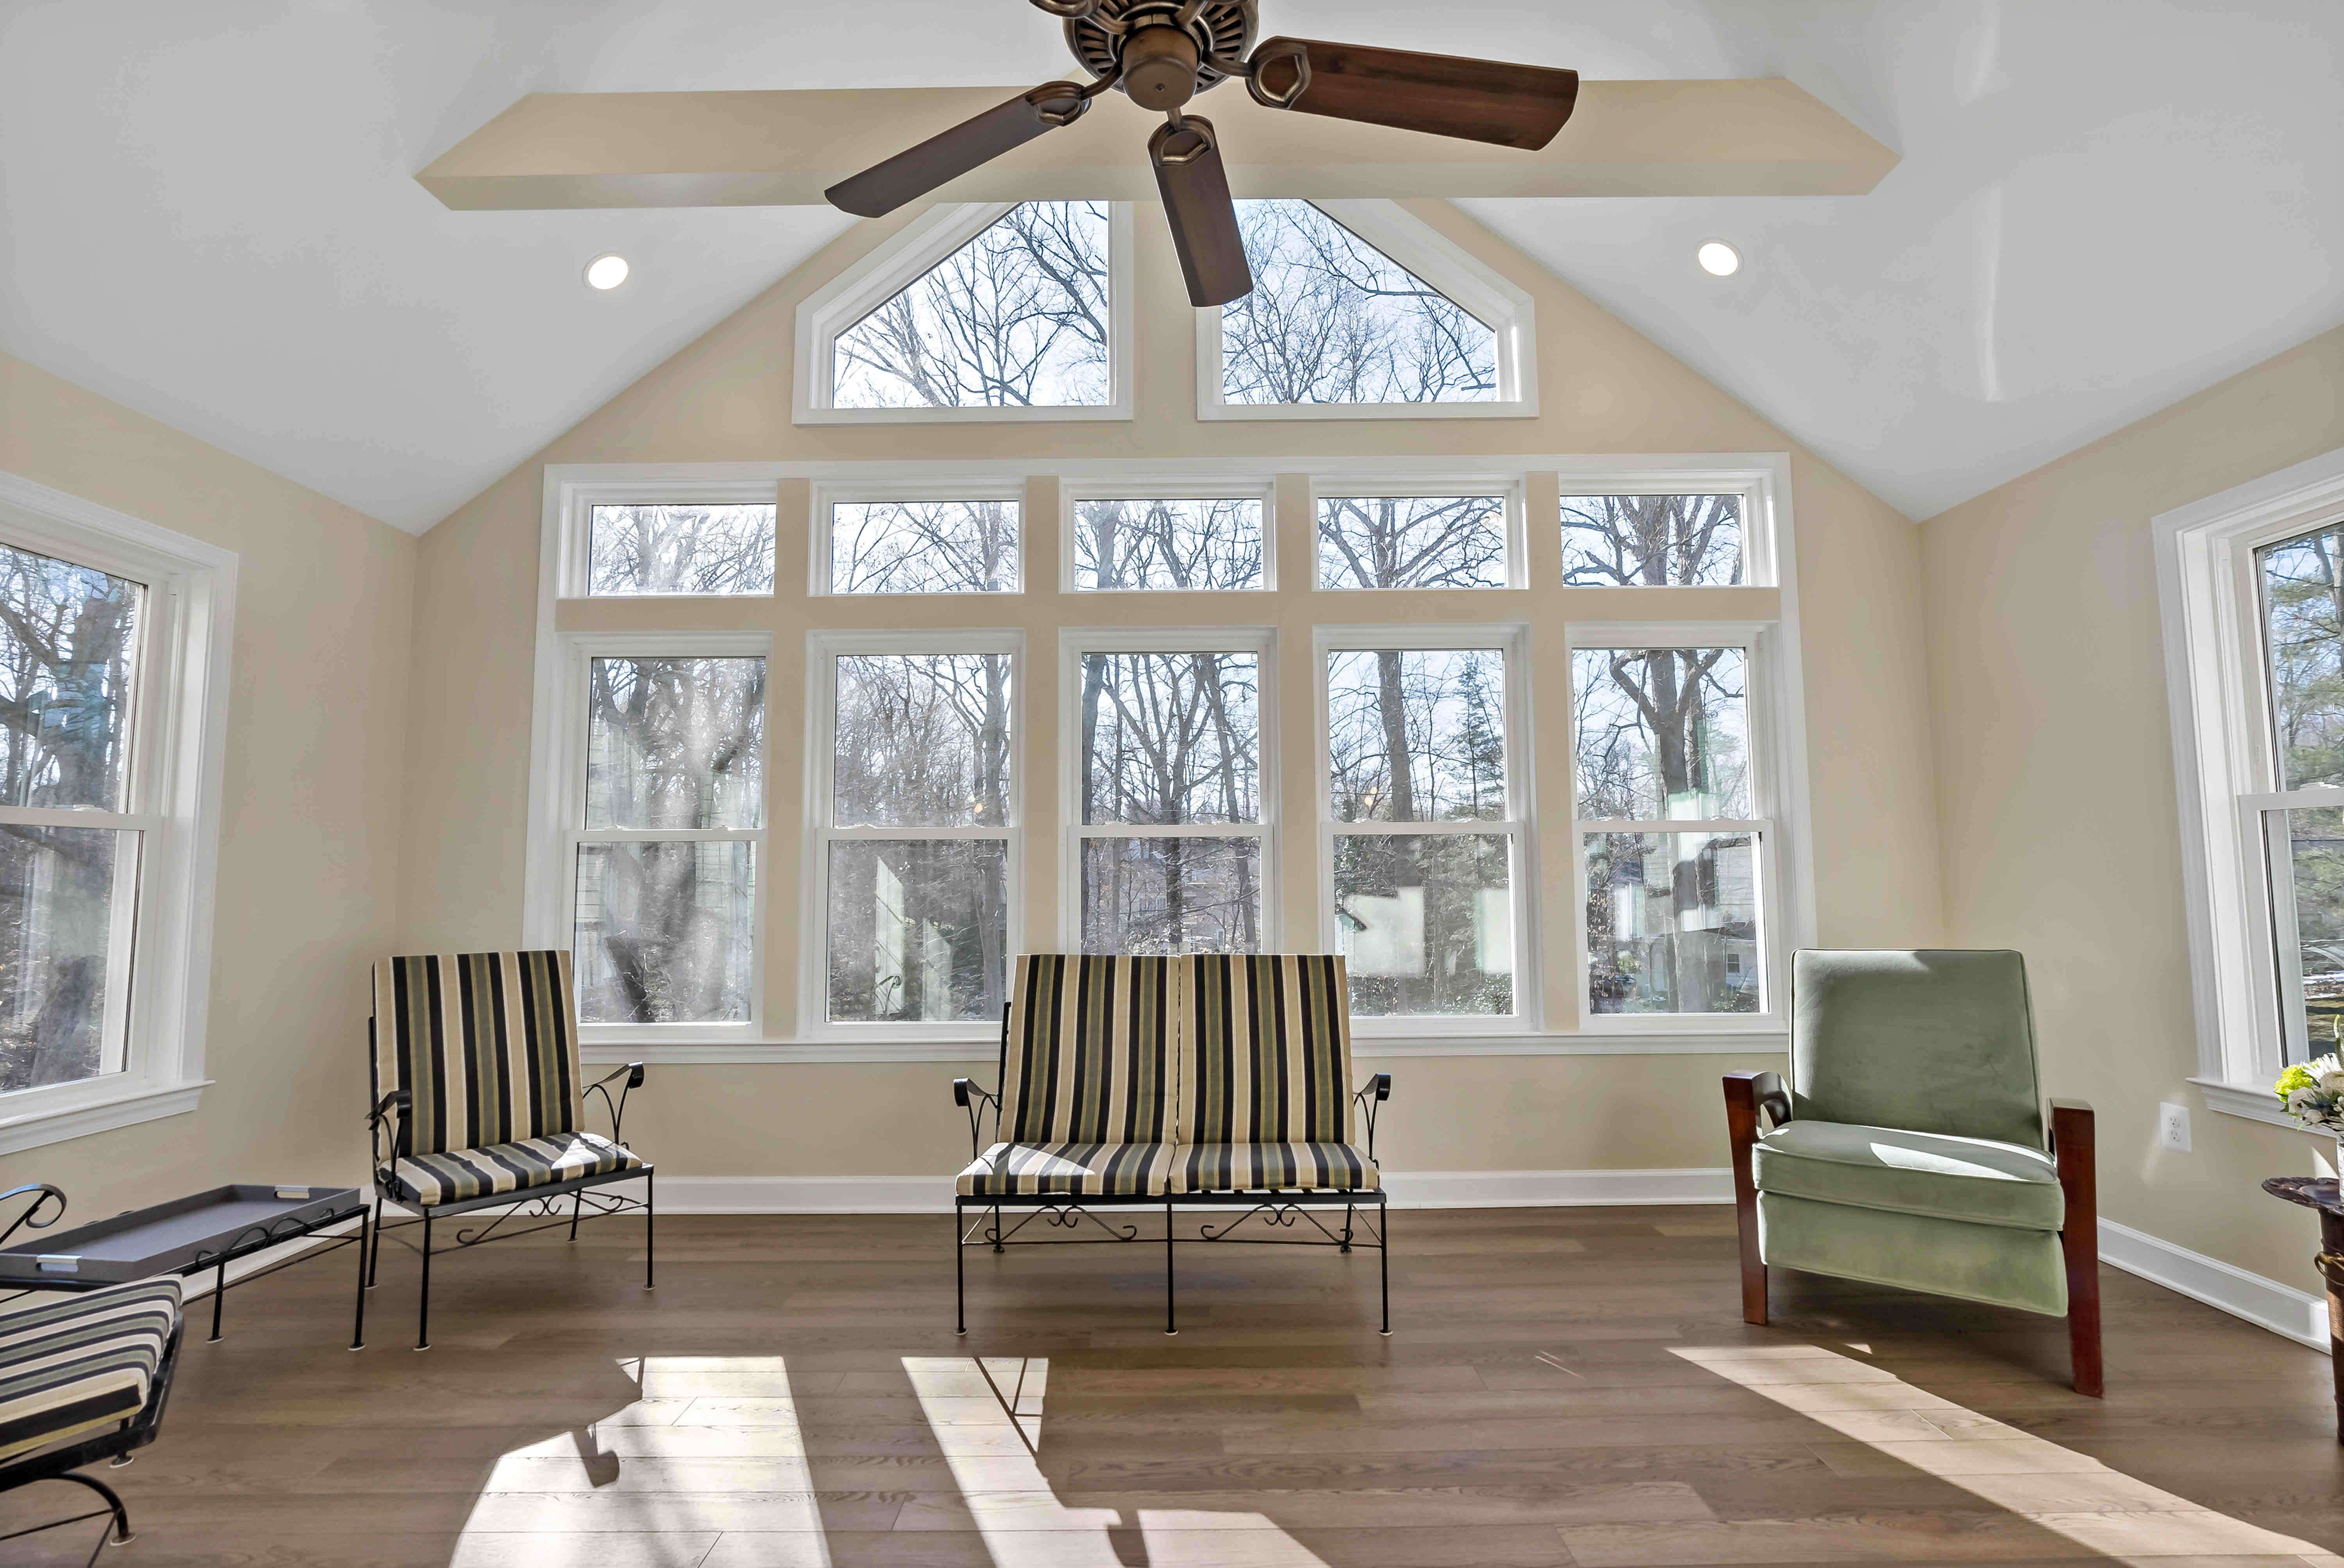 Cathedral ceiling and hardwood floors in room addition